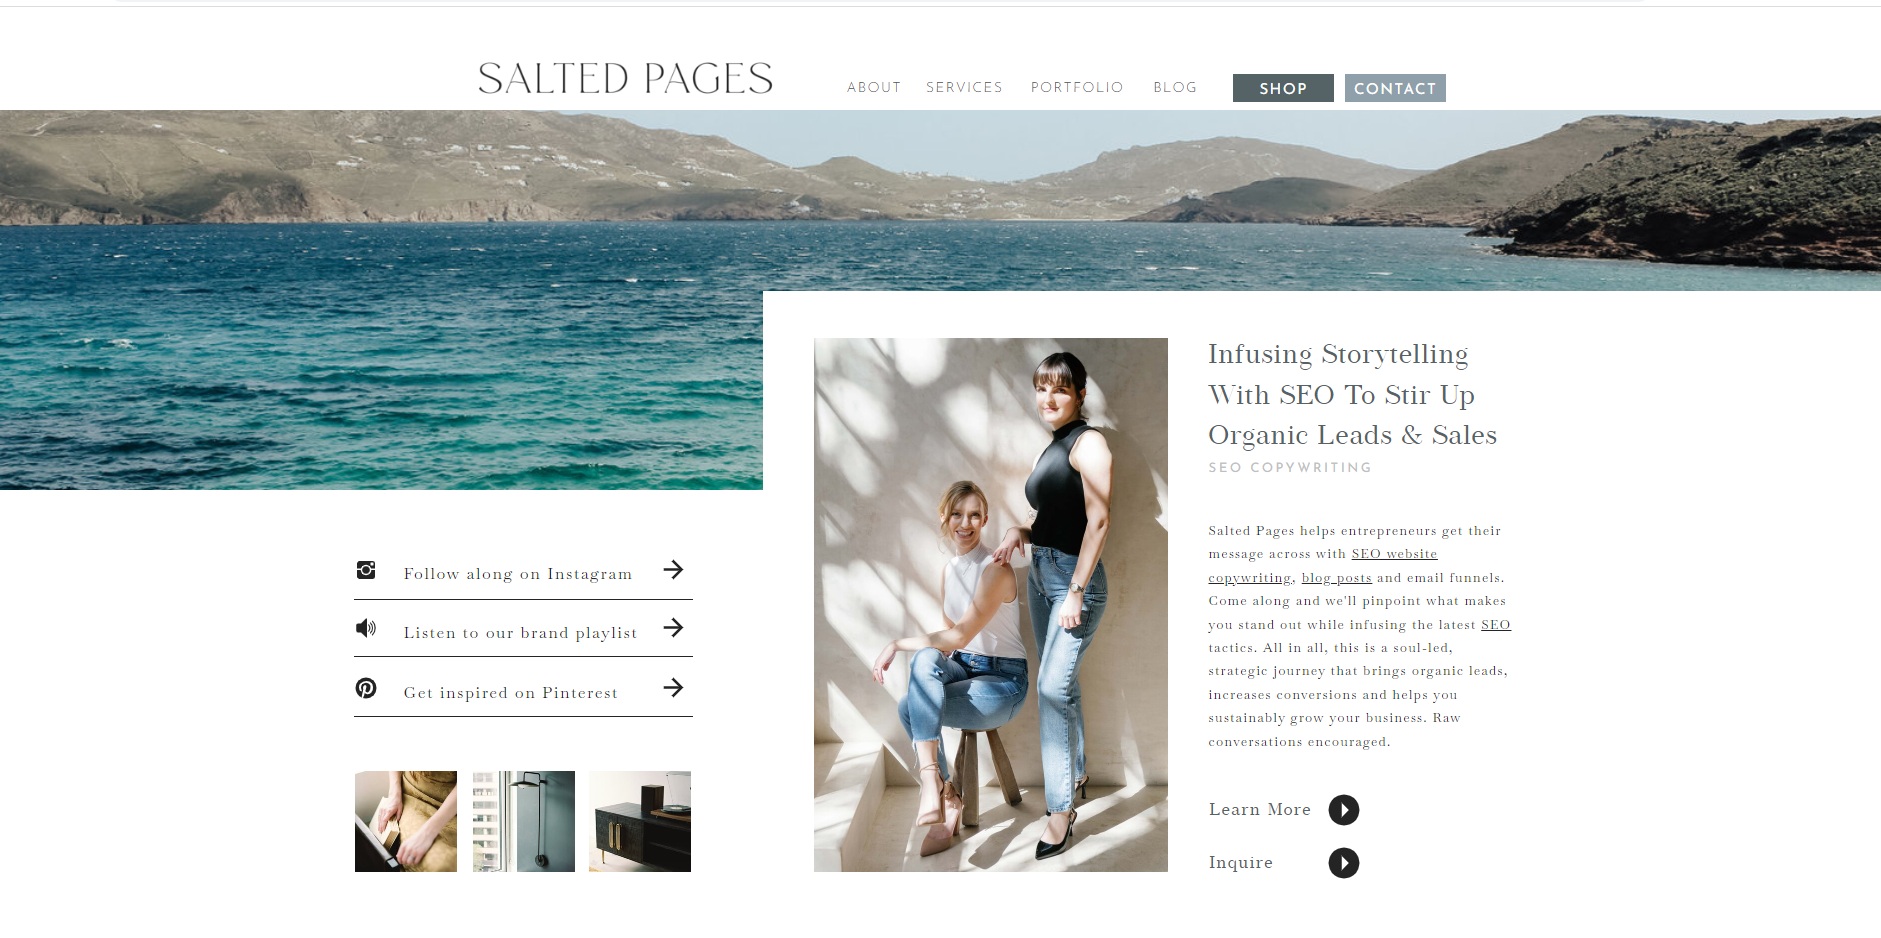 website home page for a copywriting agency called Salted Pages. The home page shows an image of the sea in the background and two young-ish white women dressed casually in jeans, along with text about their agency.